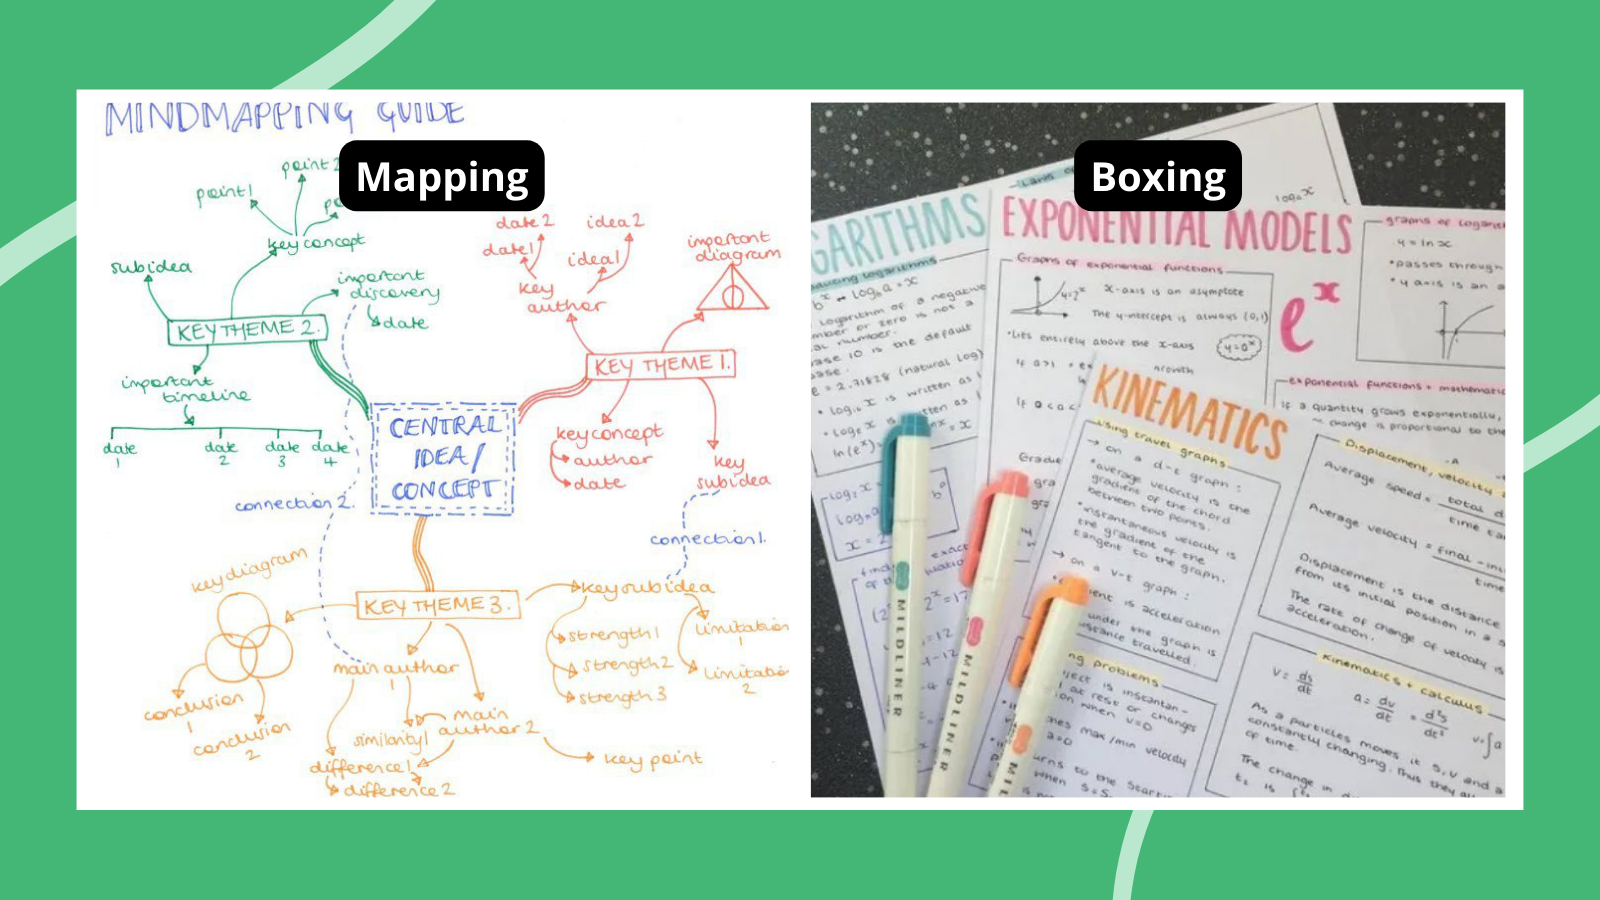 Examples of note taking strategies including mapping and boxing.